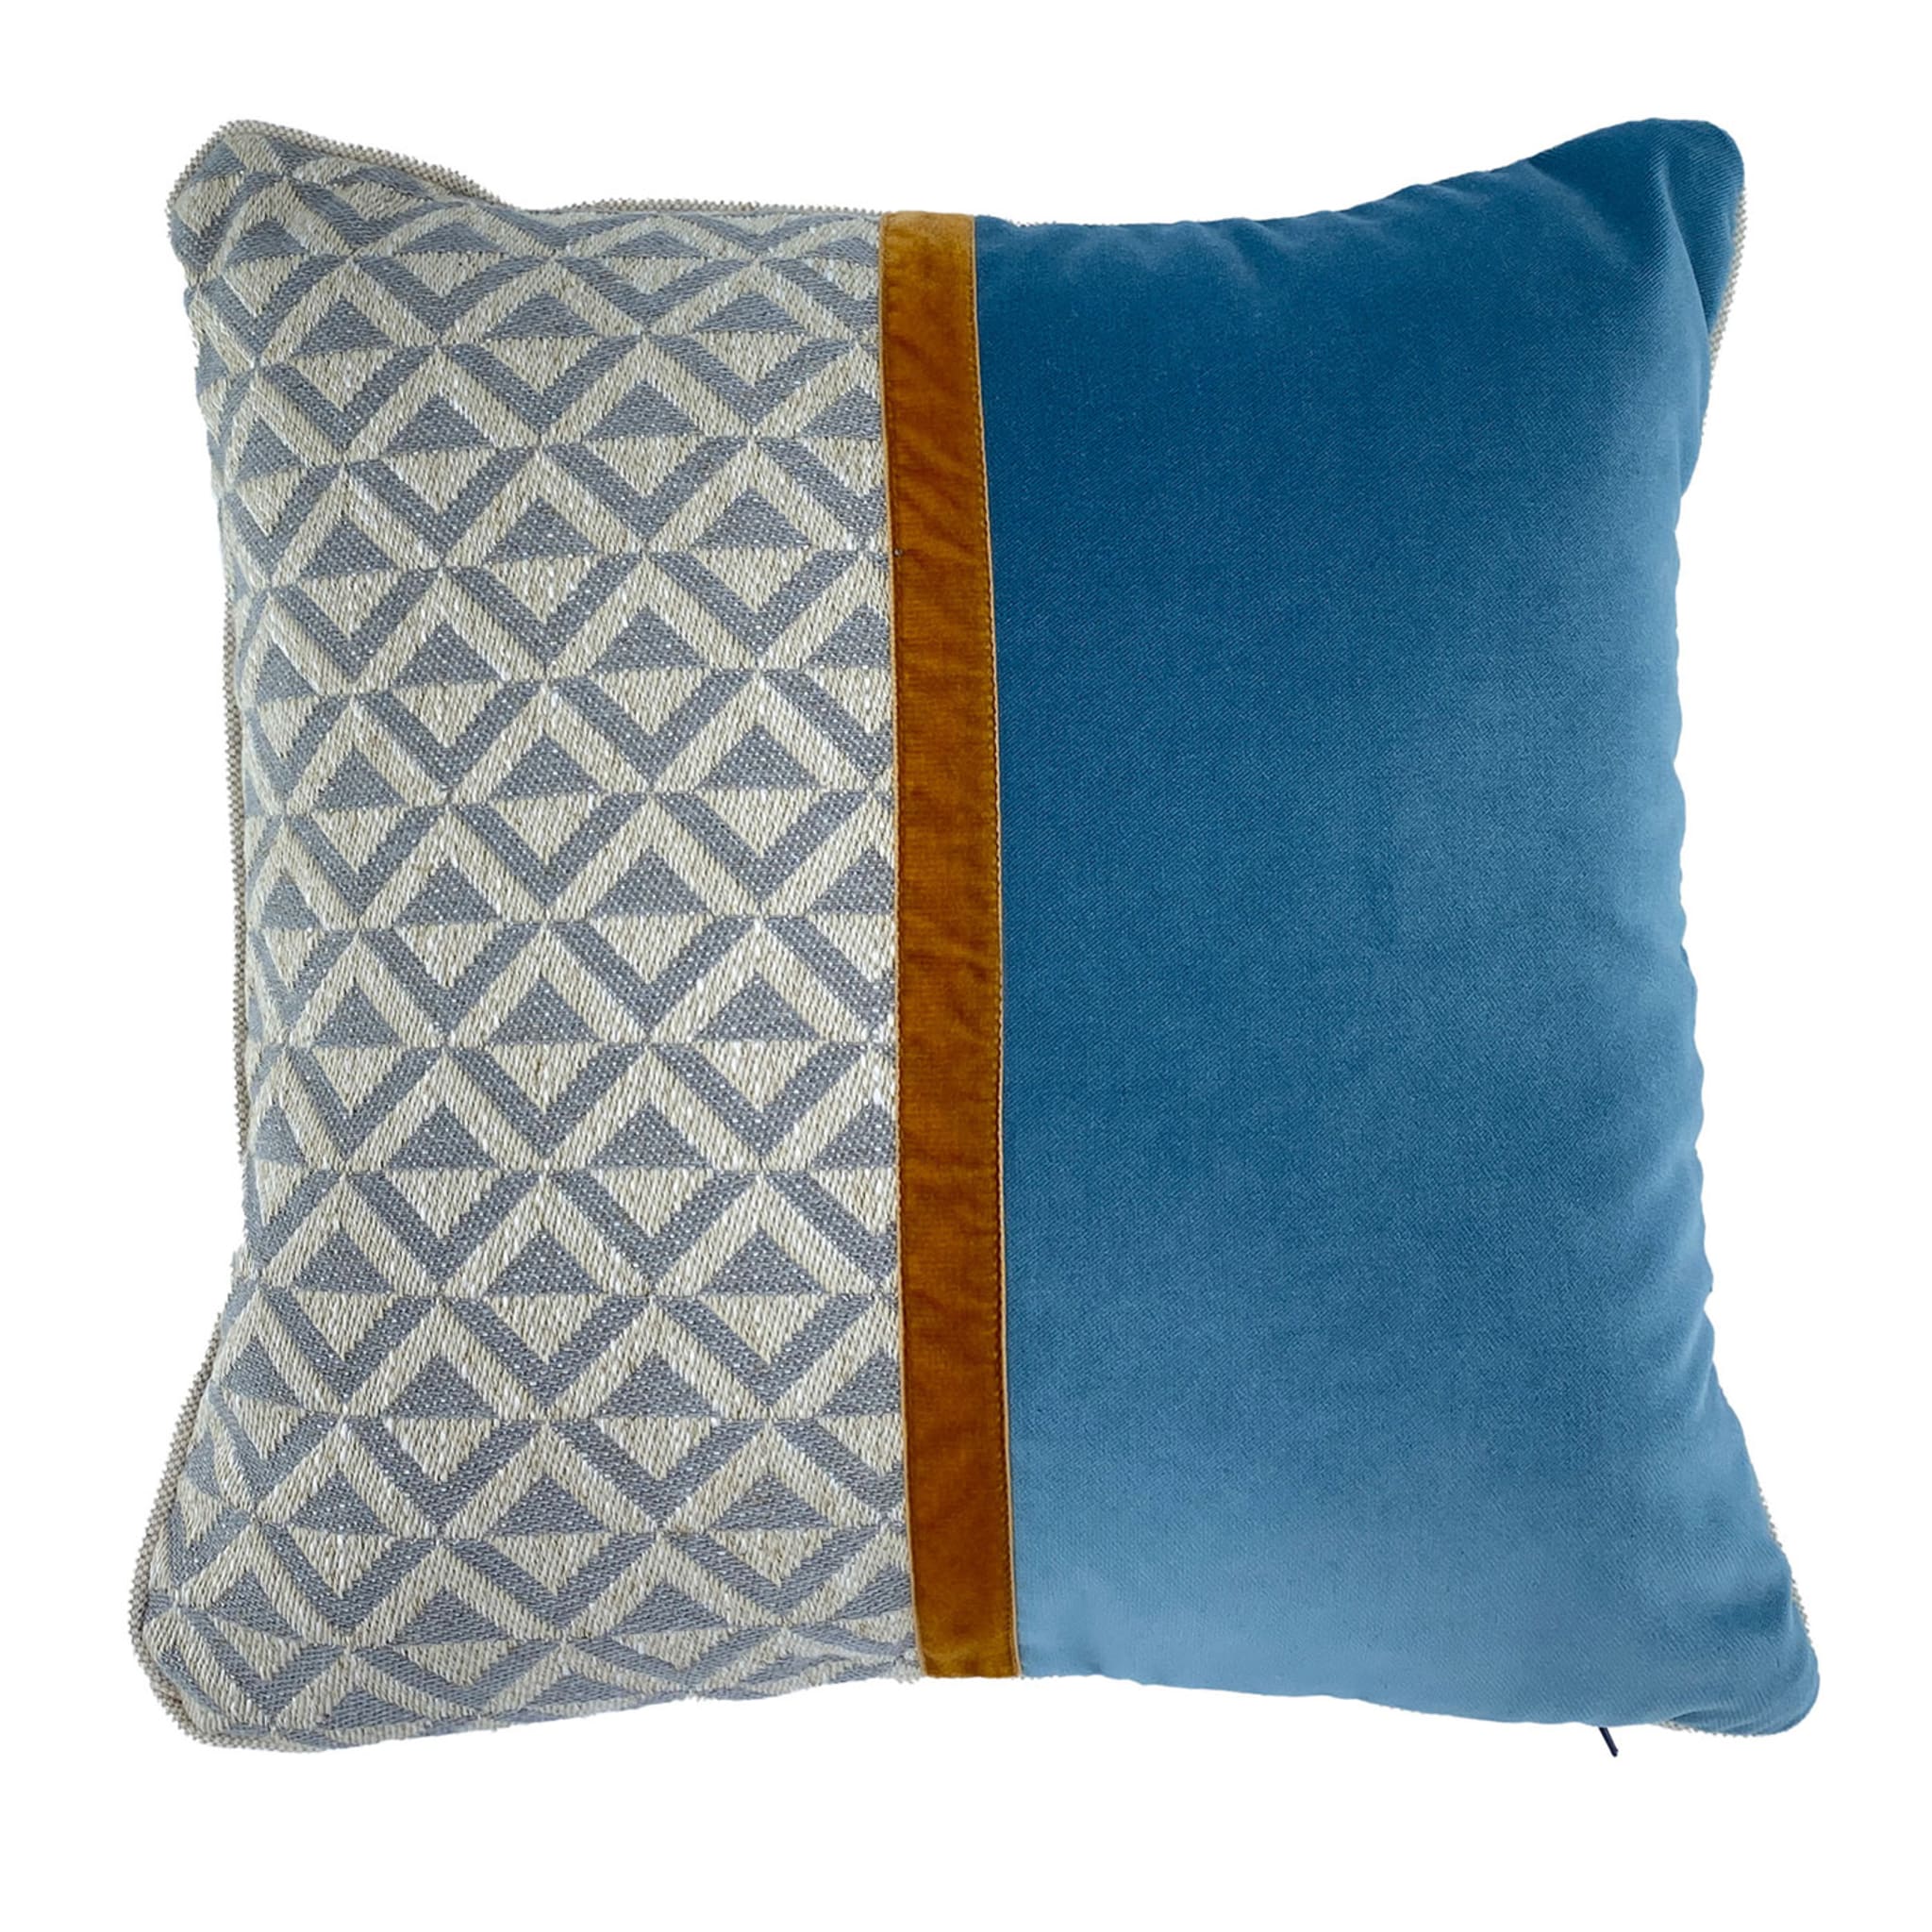 Losanghe Patterned Gray/Mid-Blue Square Cushion - Main view